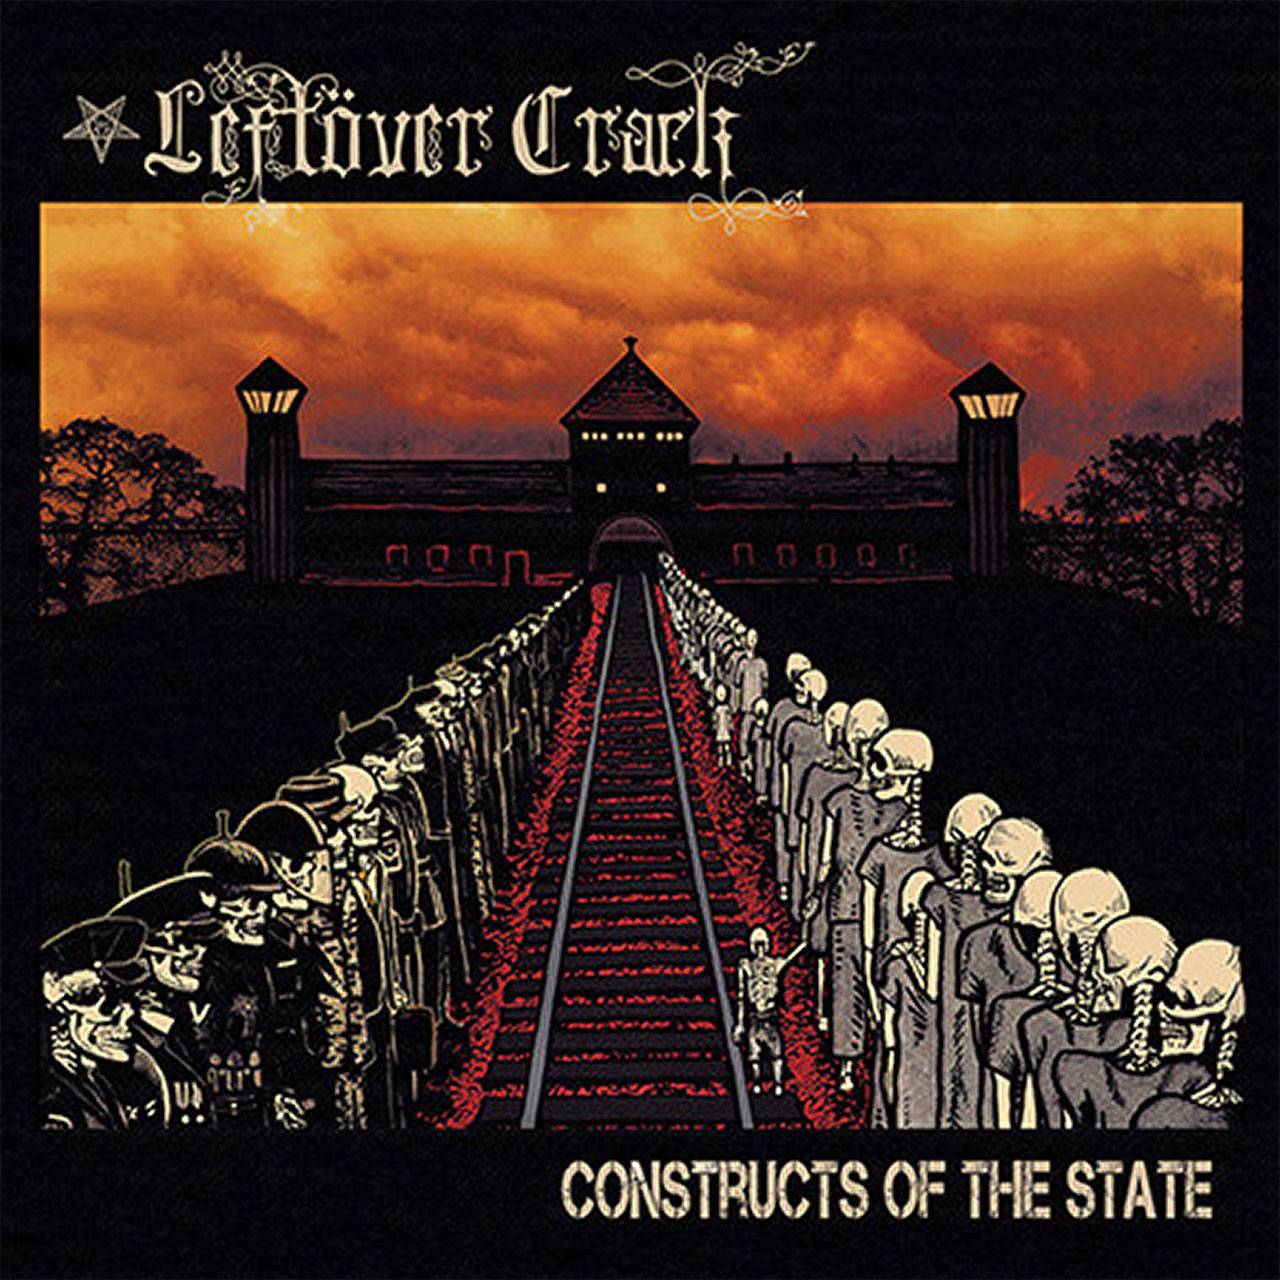 Leftover Crack - Constructs Of The State